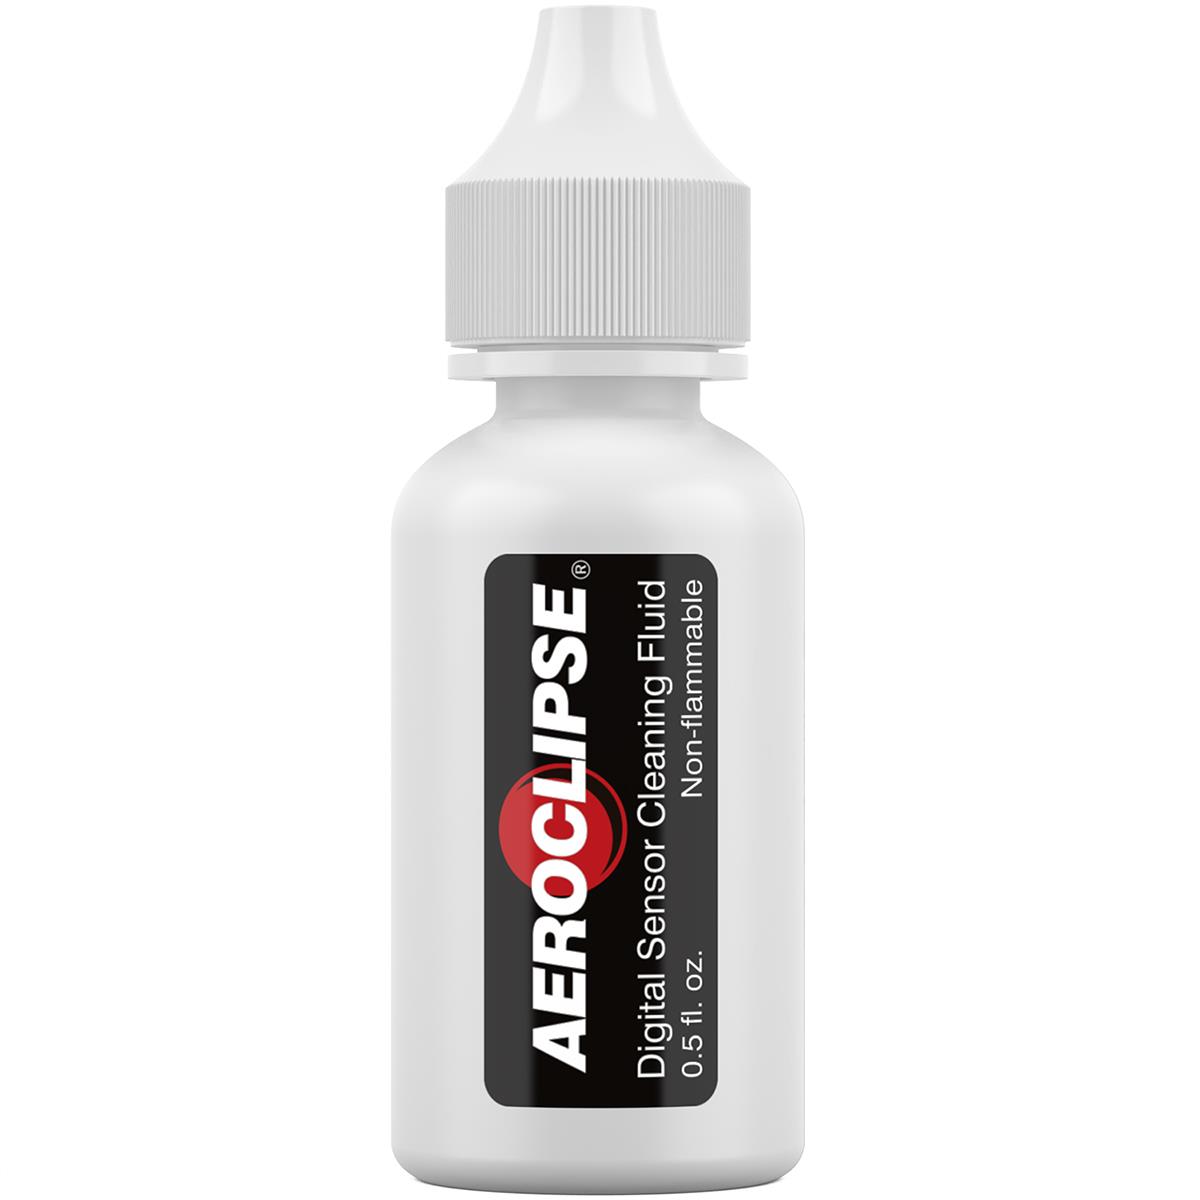 Image of Photographic Solutions 0.5 fl oz Aeroclipse Cleaning Fluid for Digital Sensor